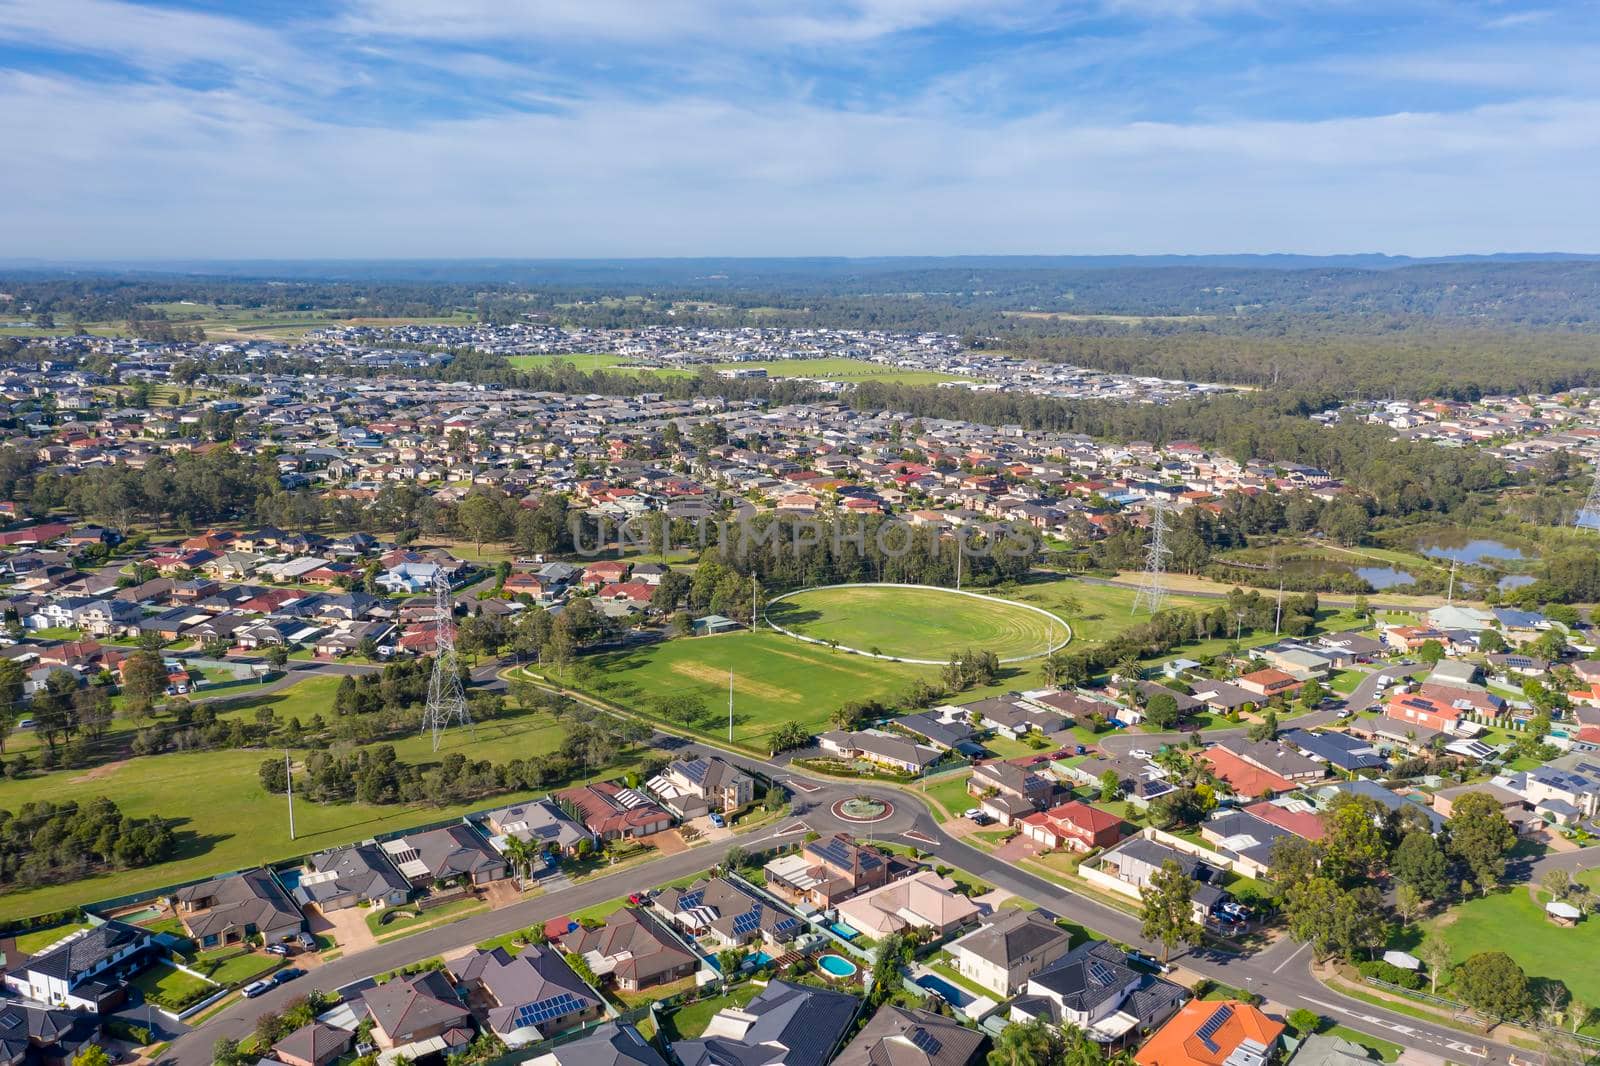 Aerial view of the suburb of Glenmore Park in New South Wales in Australia